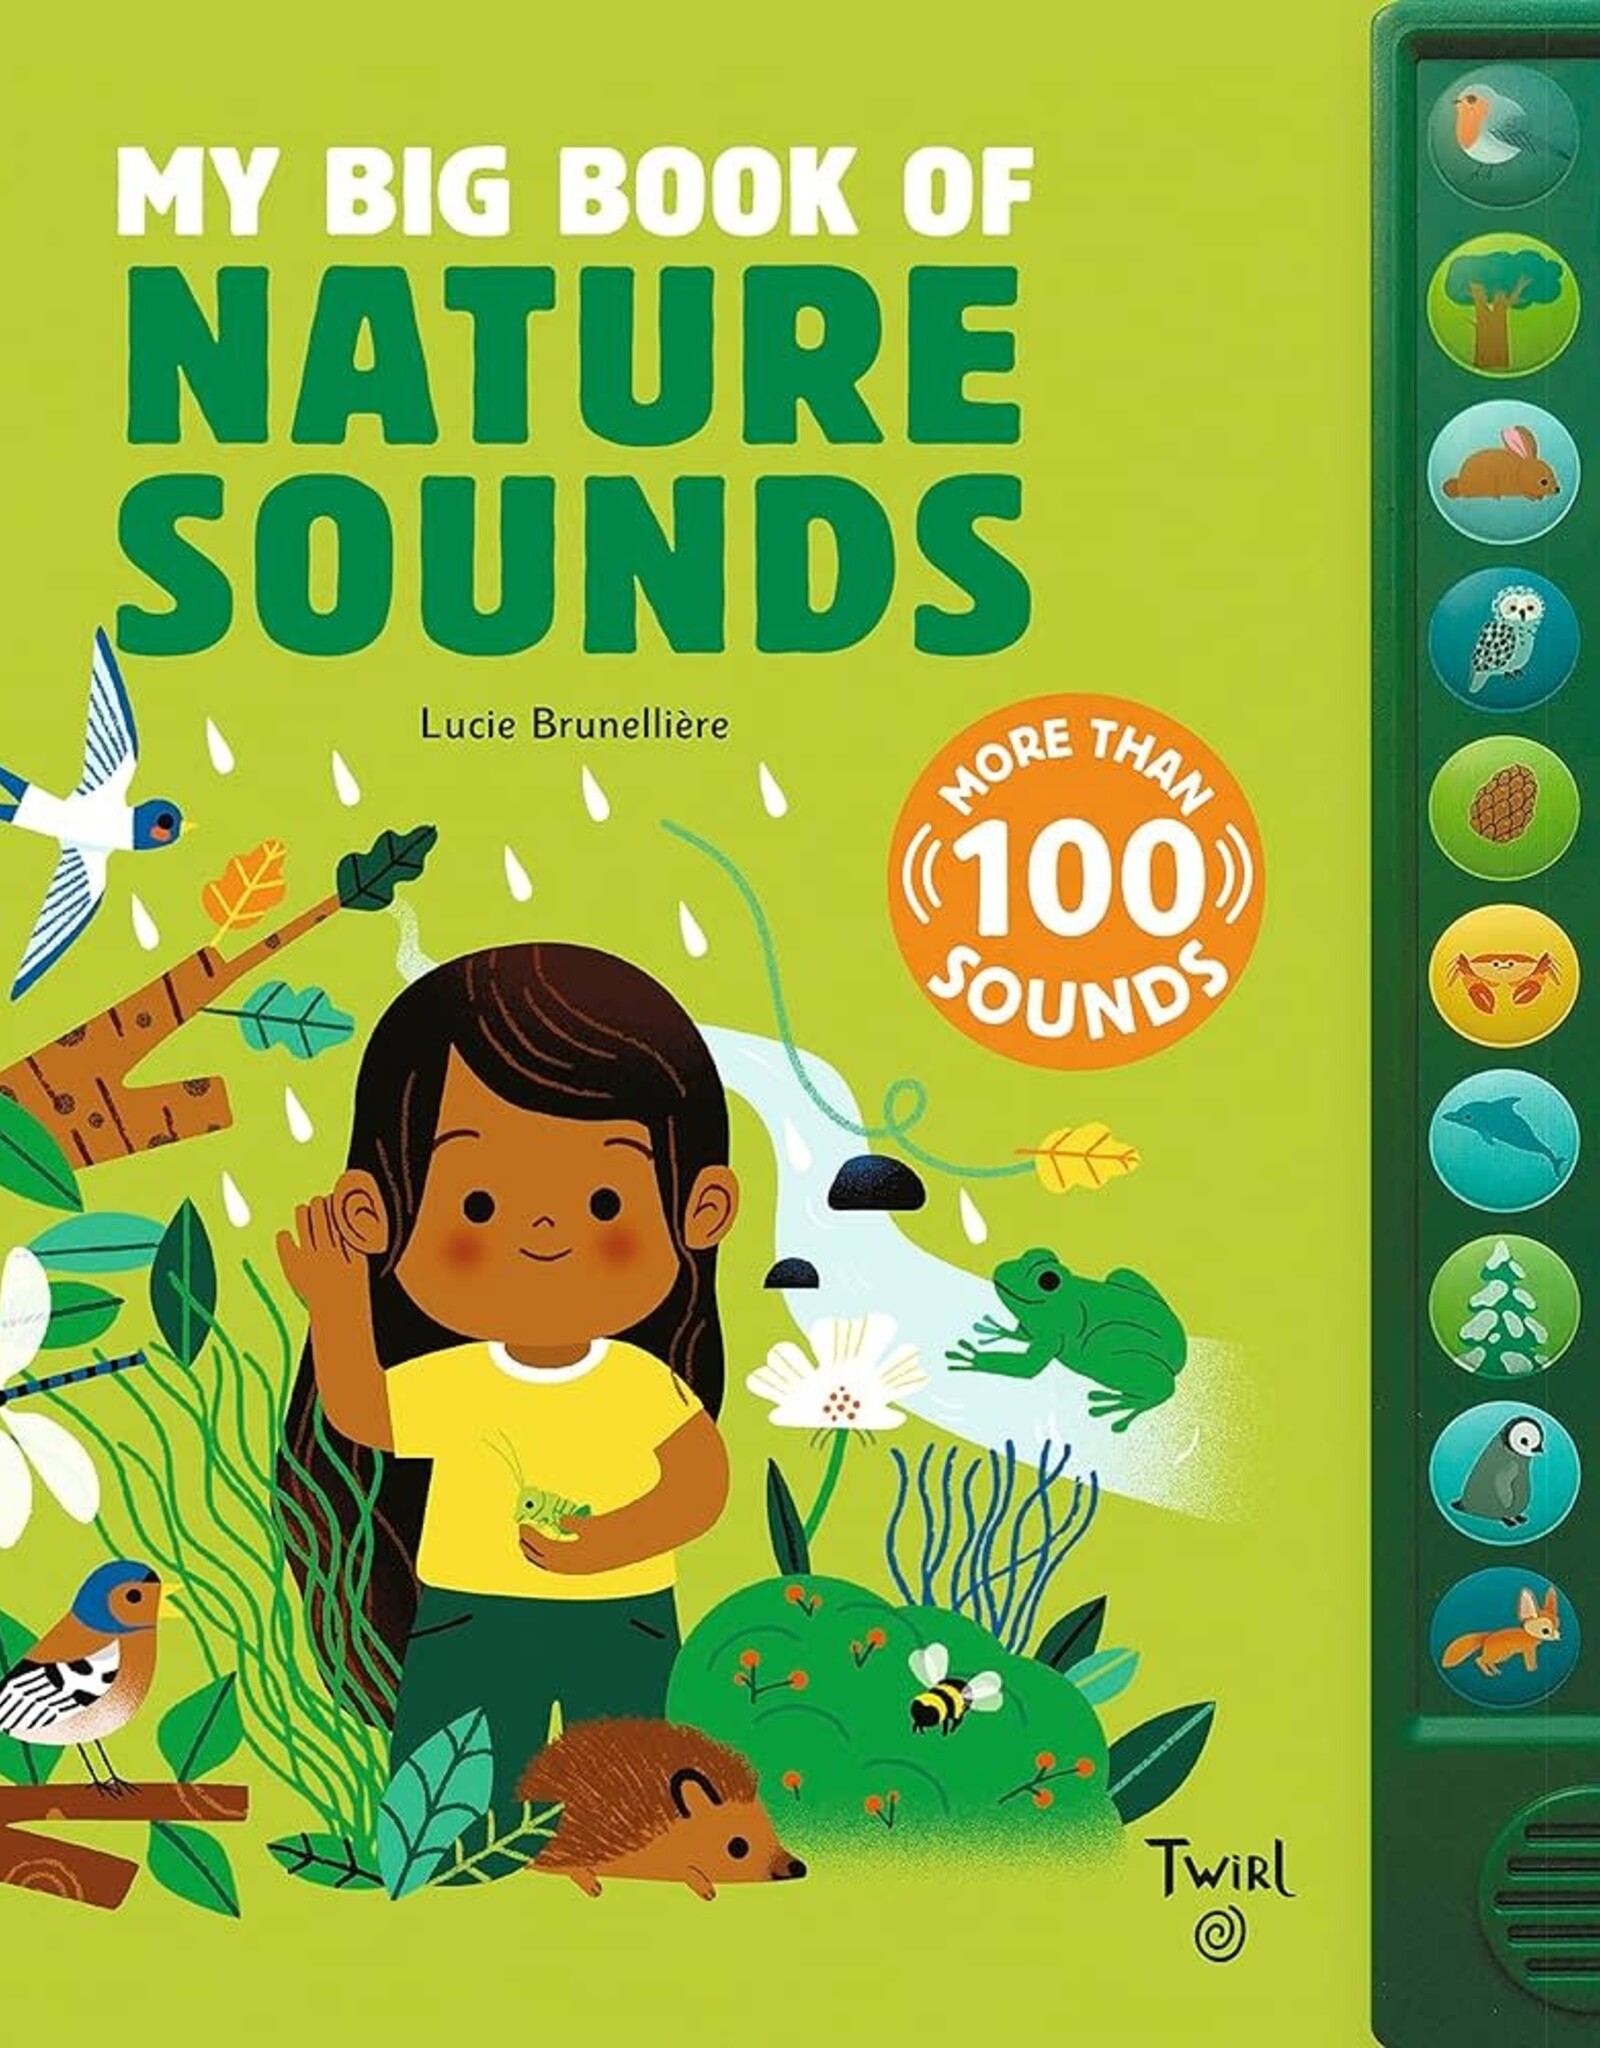 BOOK PUBLISHERS MY BIG BOOK OF NATURE SOUNDS